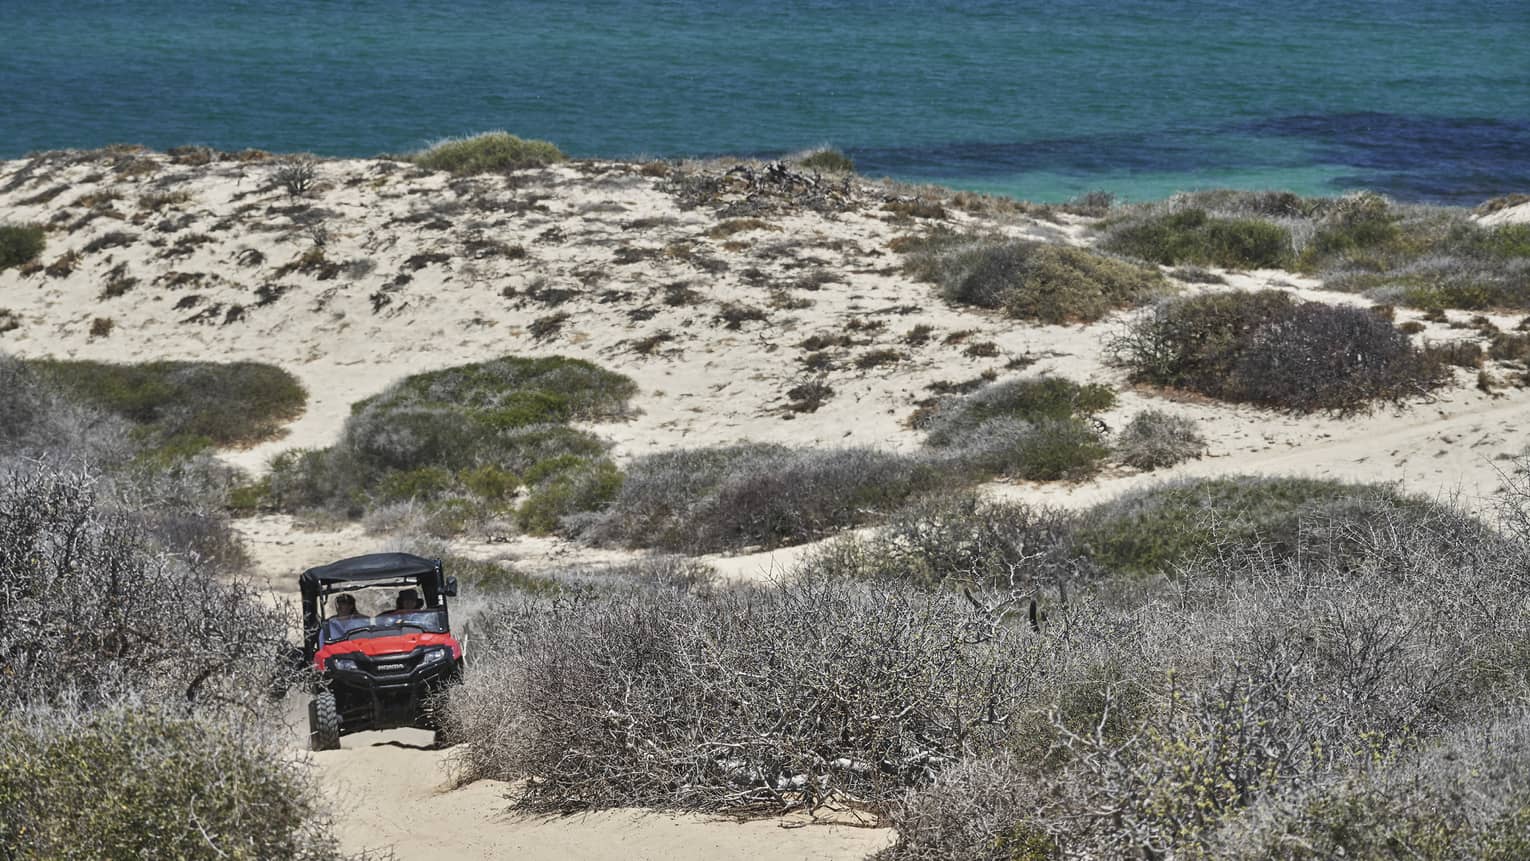 An outdoor vehicle driving over sand dunes.